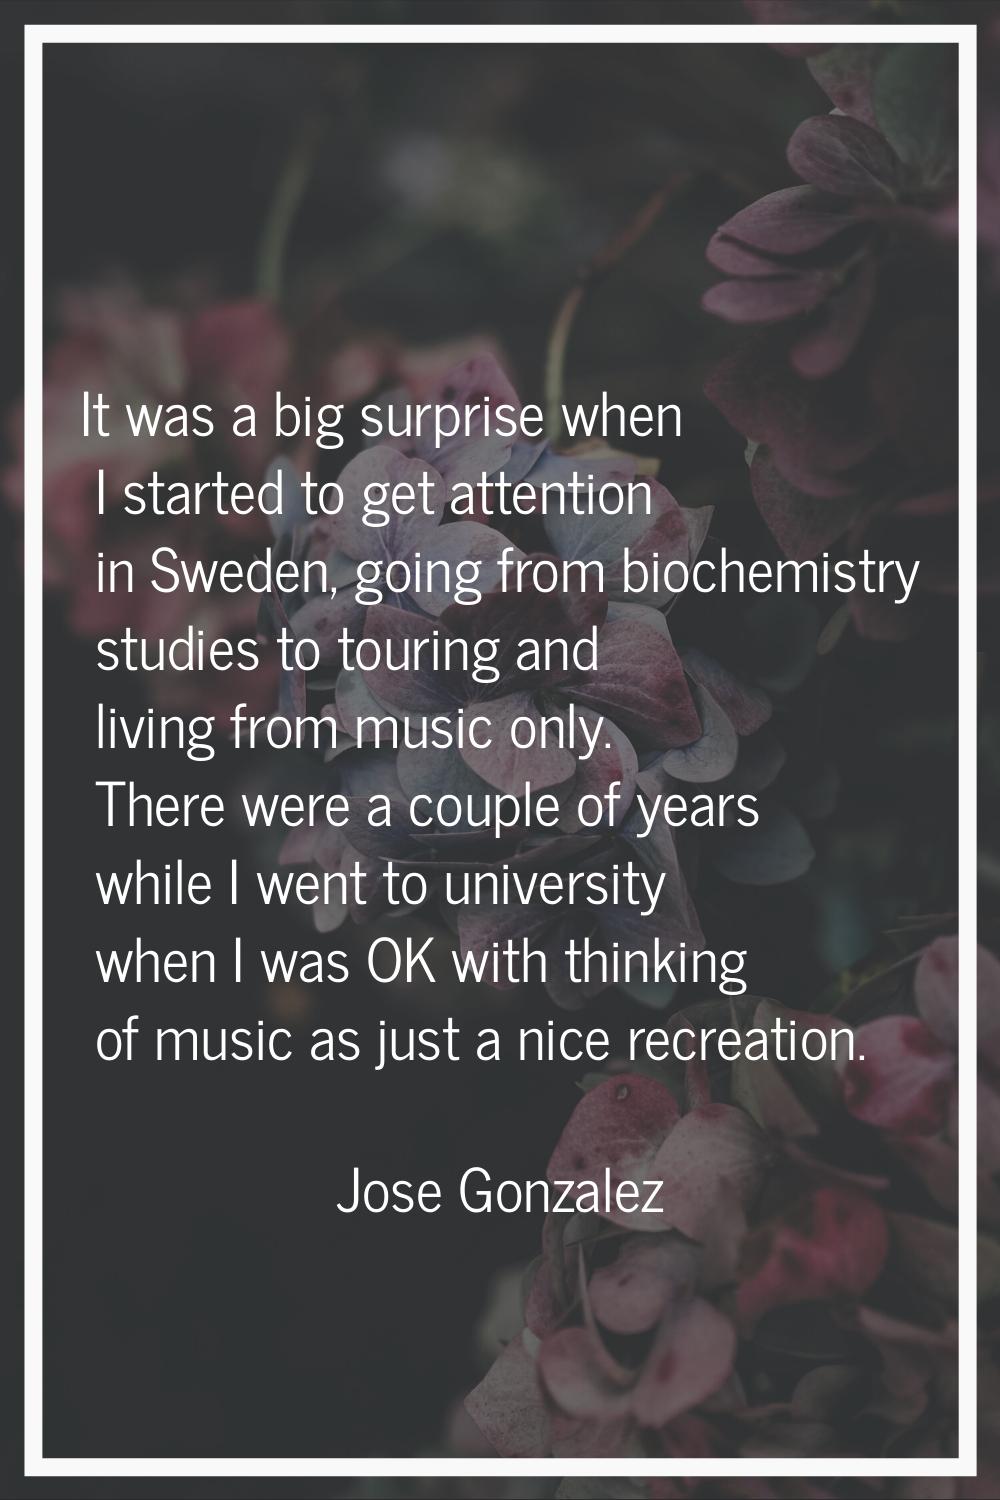 It was a big surprise when I started to get attention in Sweden, going from biochemistry studies to